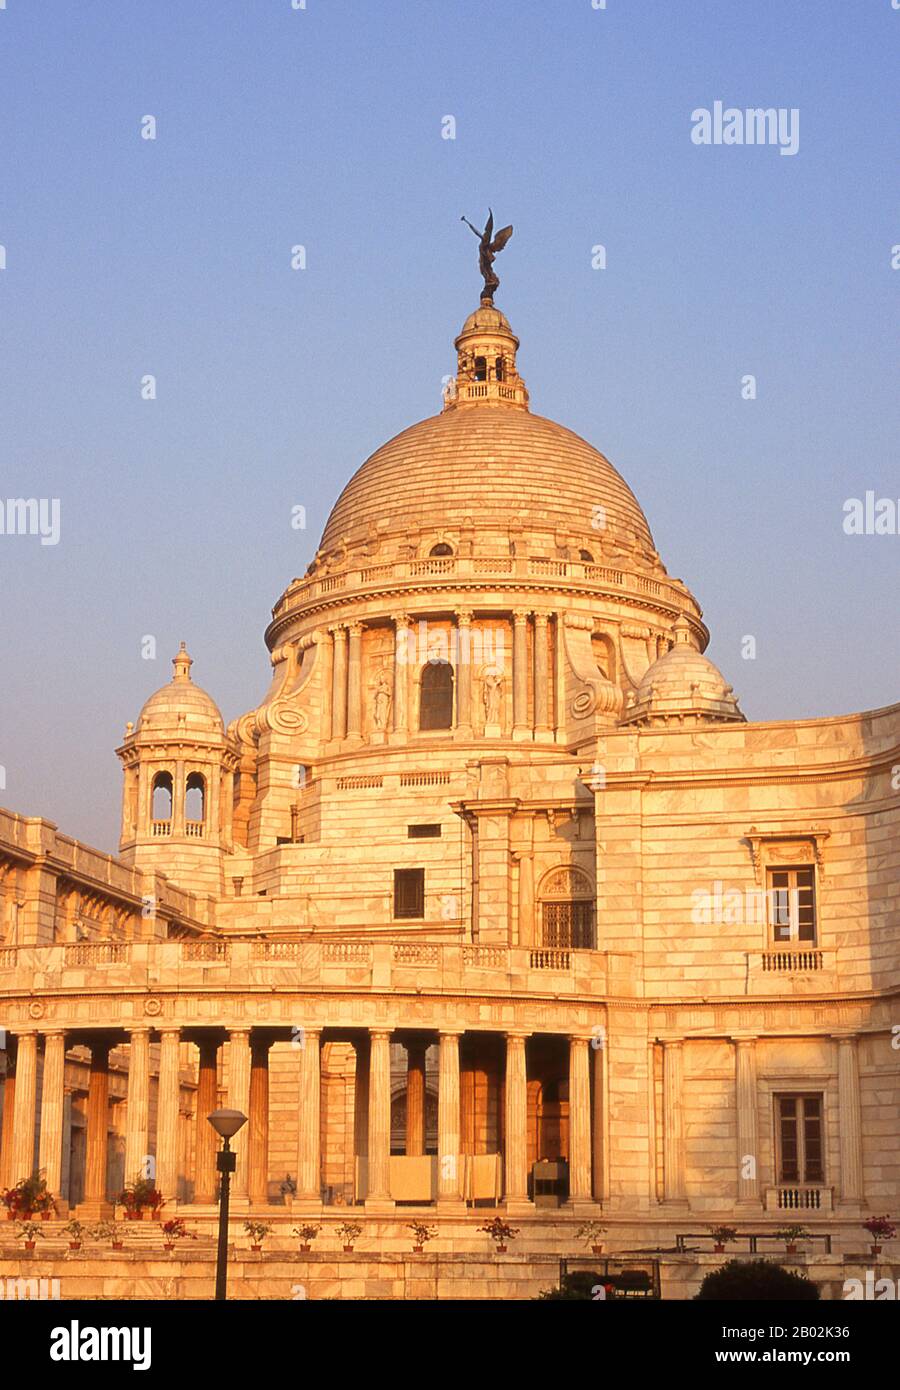 The Victoria Memorial Hall was built between 1906 and 1921 and is dedicated to the memory of Queen Victoria (1819–1901), Empress of India. The memorial was built in an Indo-Saracenic revivalist style and the architect was William Emerson (1843 - 1924).  The tax records of Mughal Emperor Akbar (1584–1598) as well as the work of a 15th century Bengali poet, Bipradaas, both mention a settlement named Kalikata (thought to mean ‘Steps of Kali’ for the Hindu goddess Kali) from which the name Calcutta is believed to derive.  In 1690 Job Charnock, an agent of the East India Company, founded the first Stock Photo